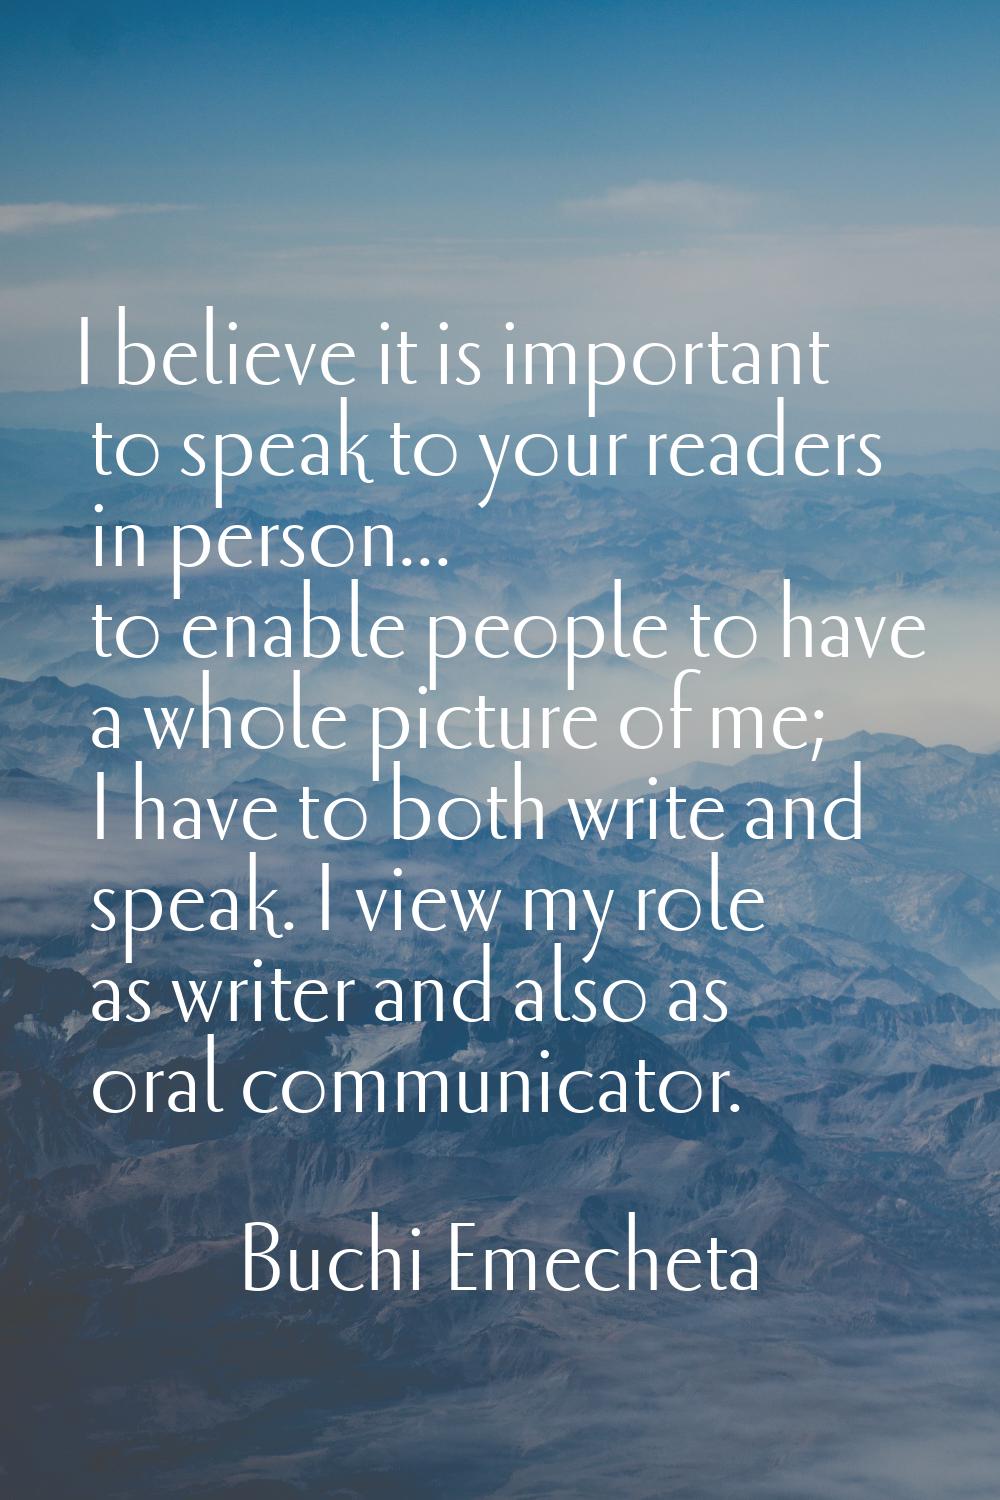 I believe it is important to speak to your readers in person... to enable people to have a whole pi